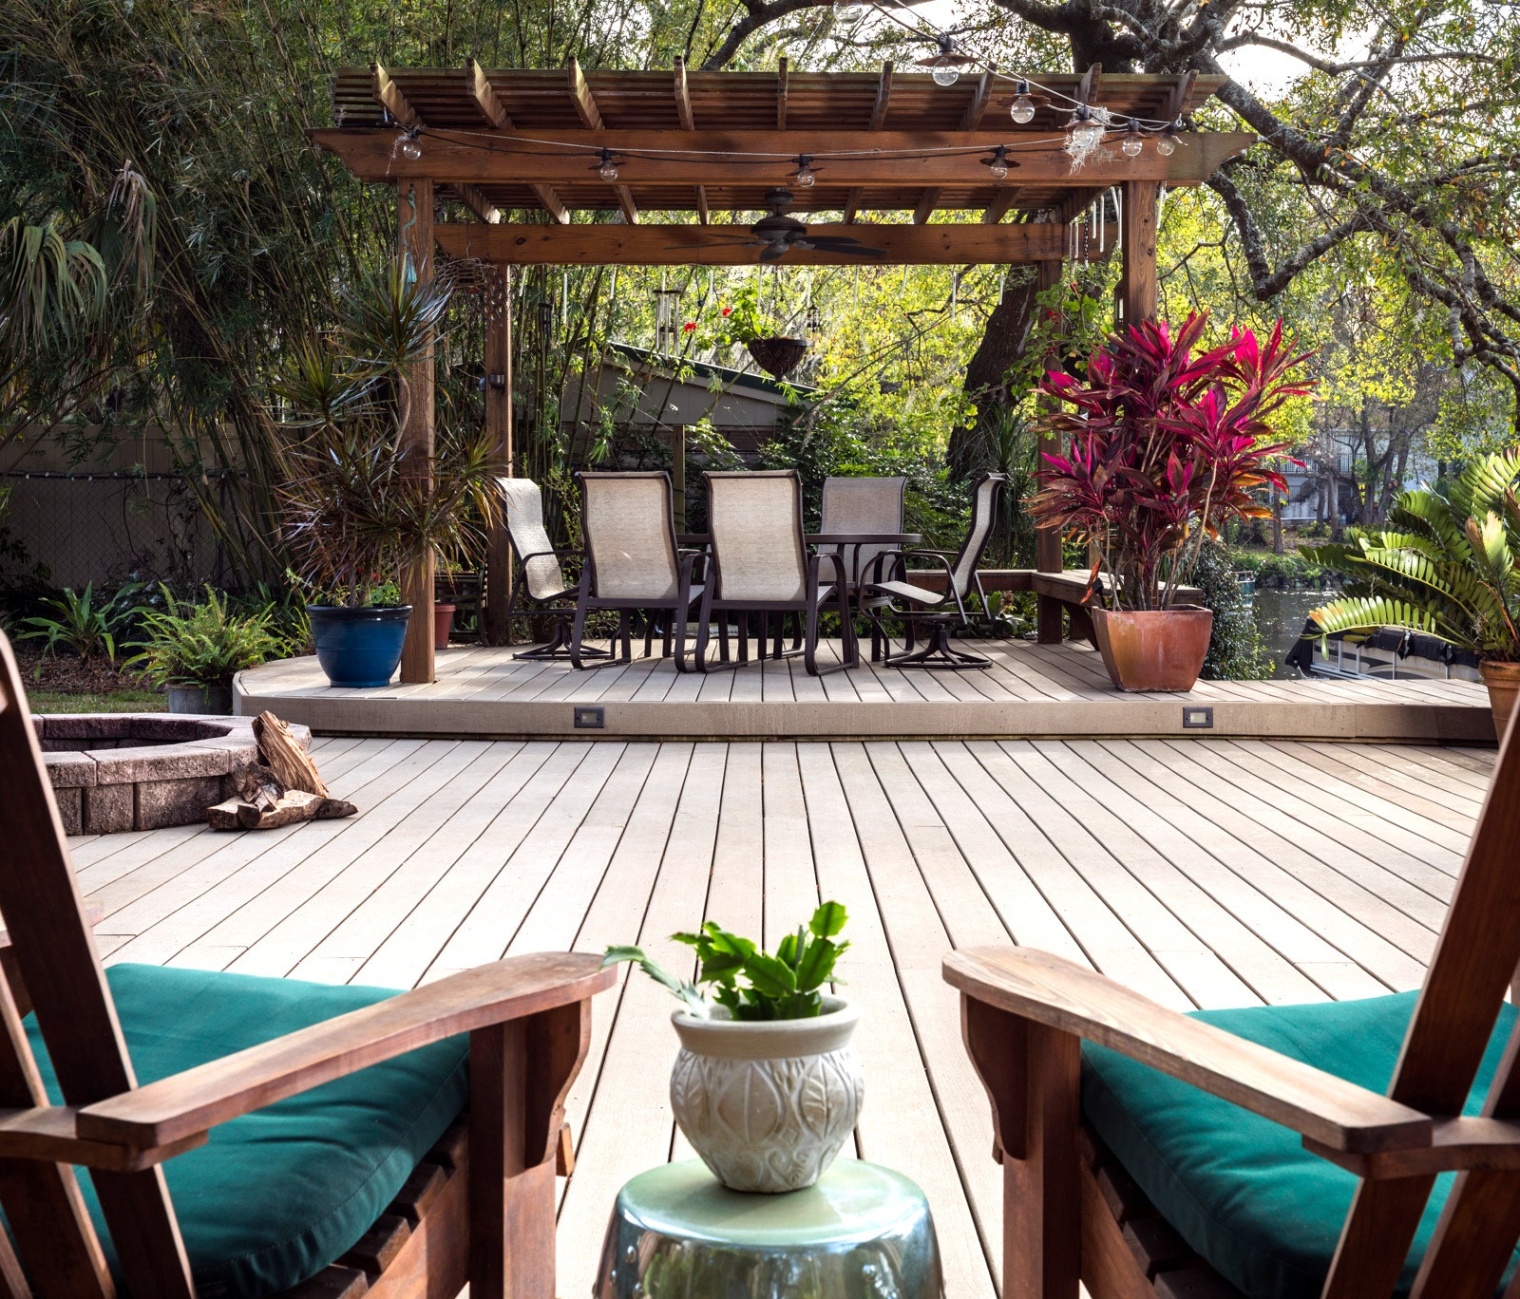 Get Creative With Your Outdoor Space: 10 Unique Deck Design Ideas